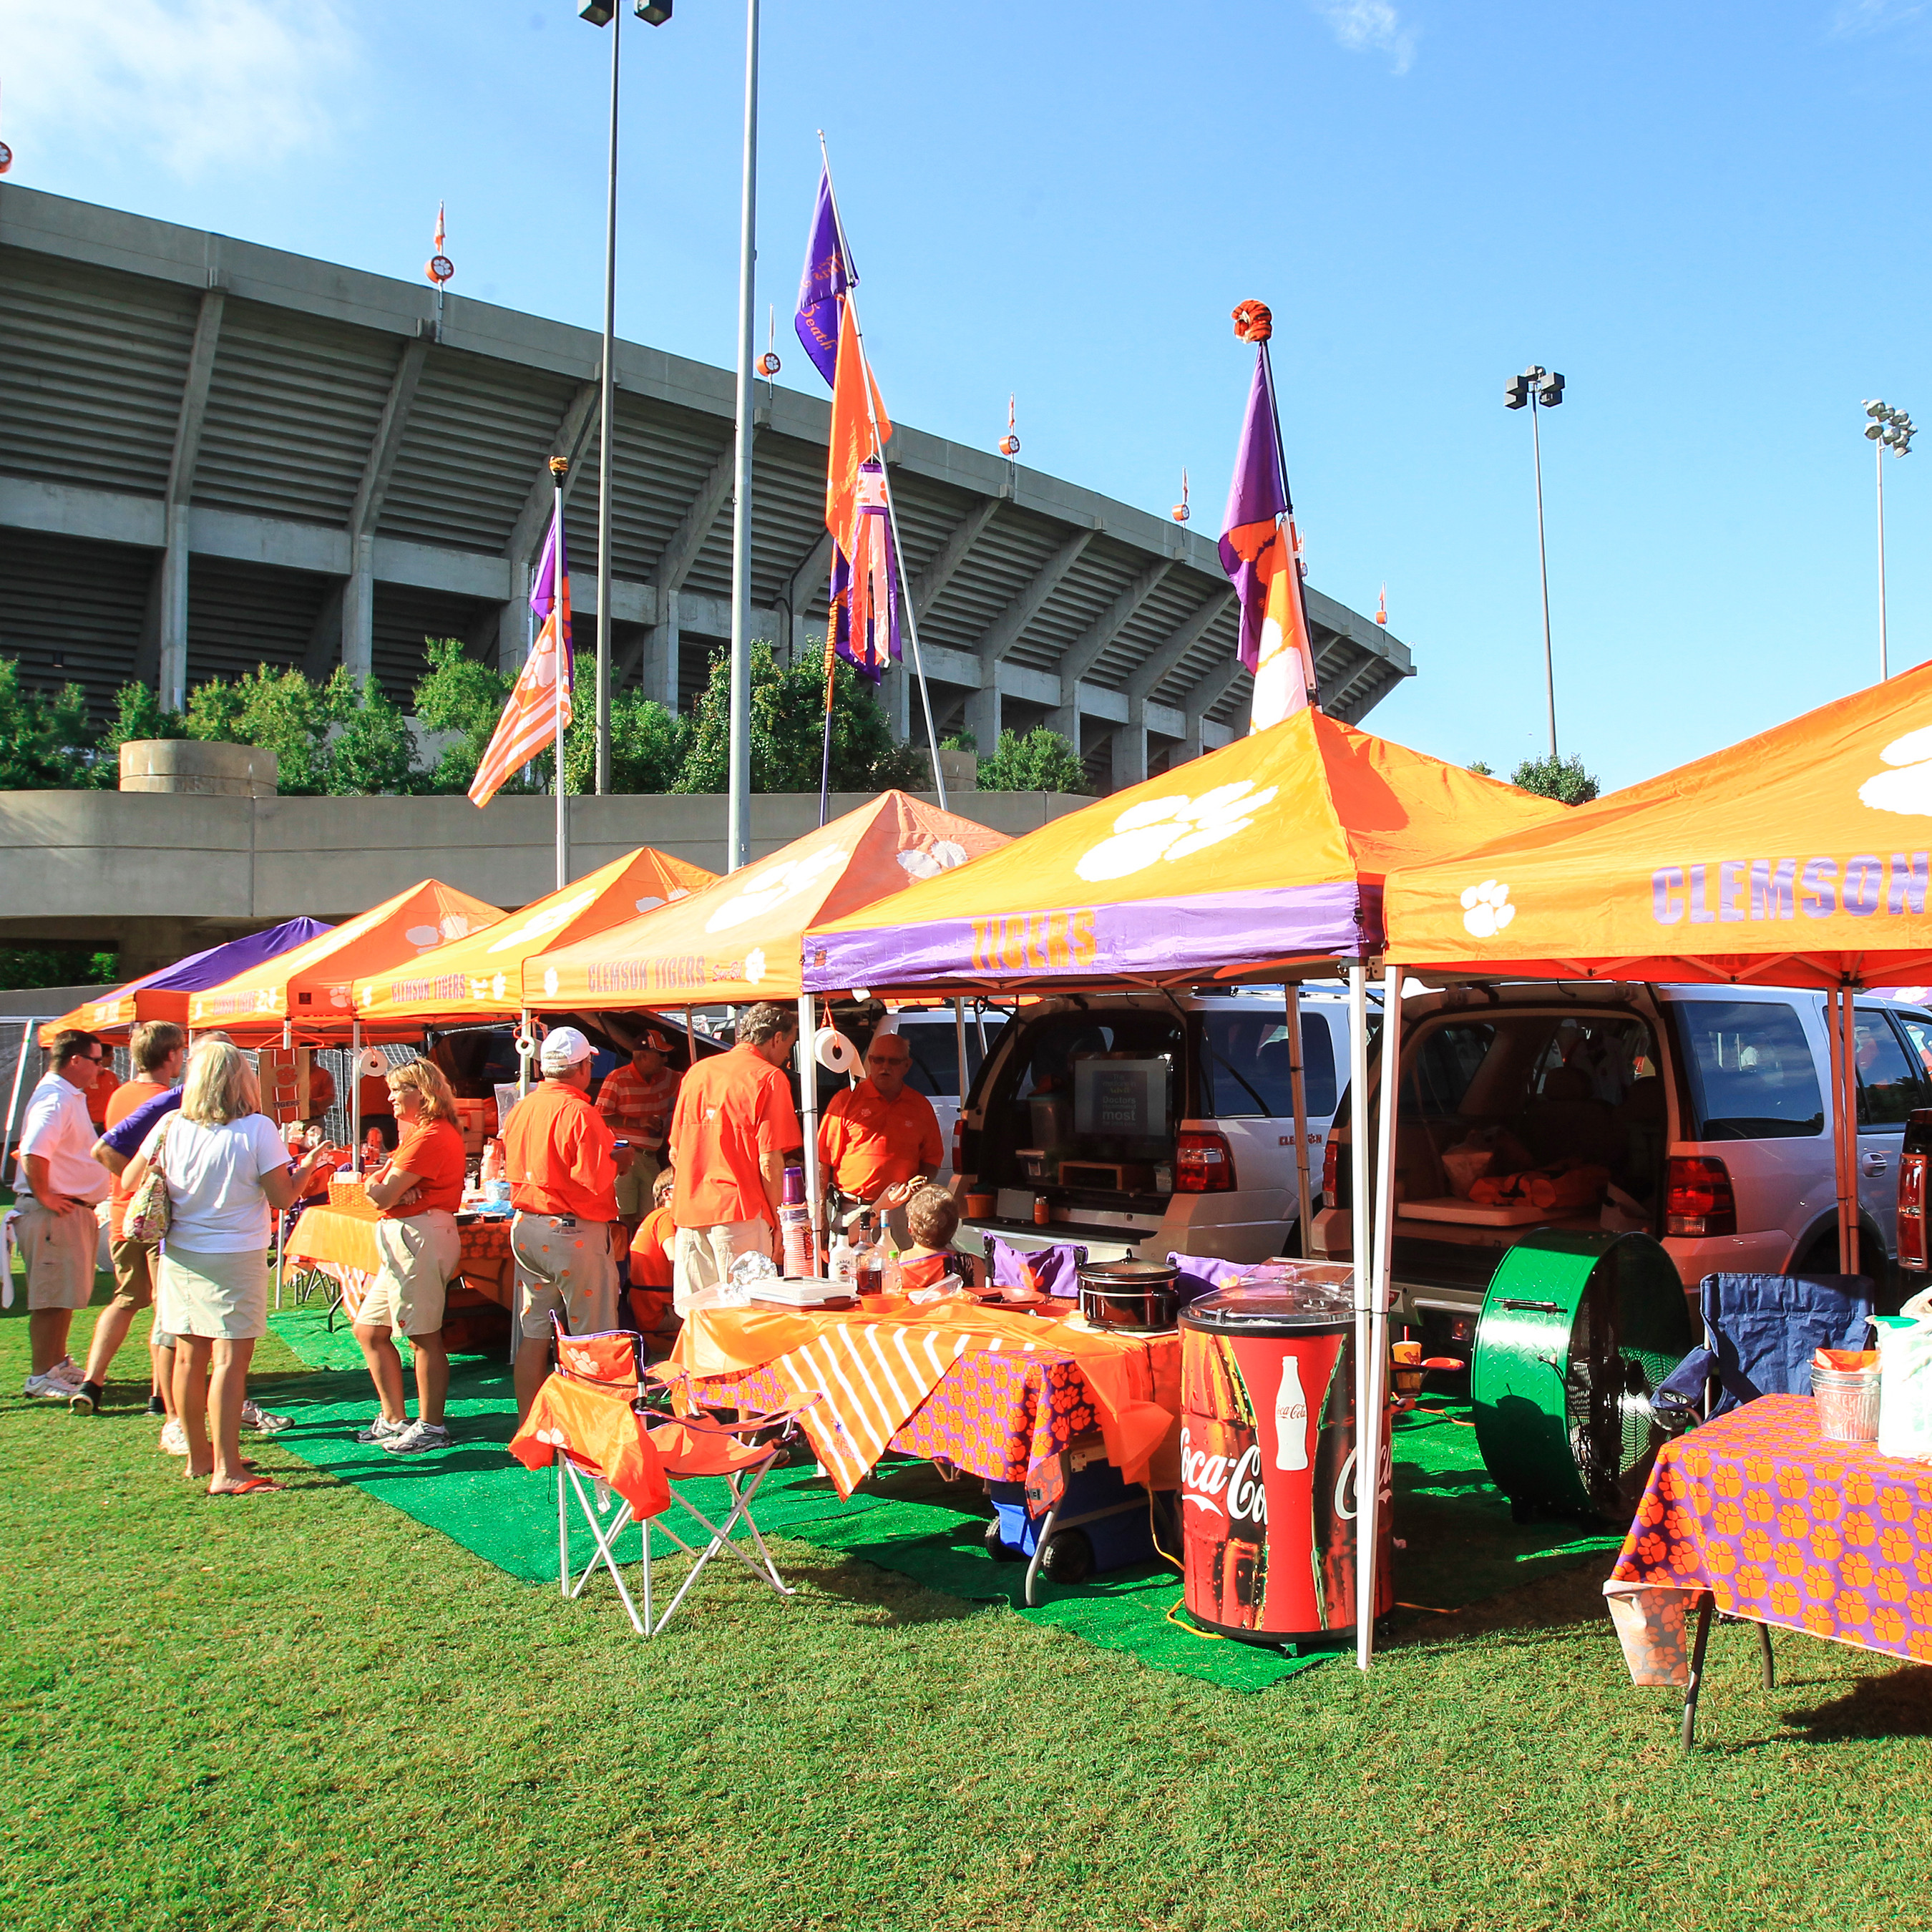 Clemson is Champion of Recycling